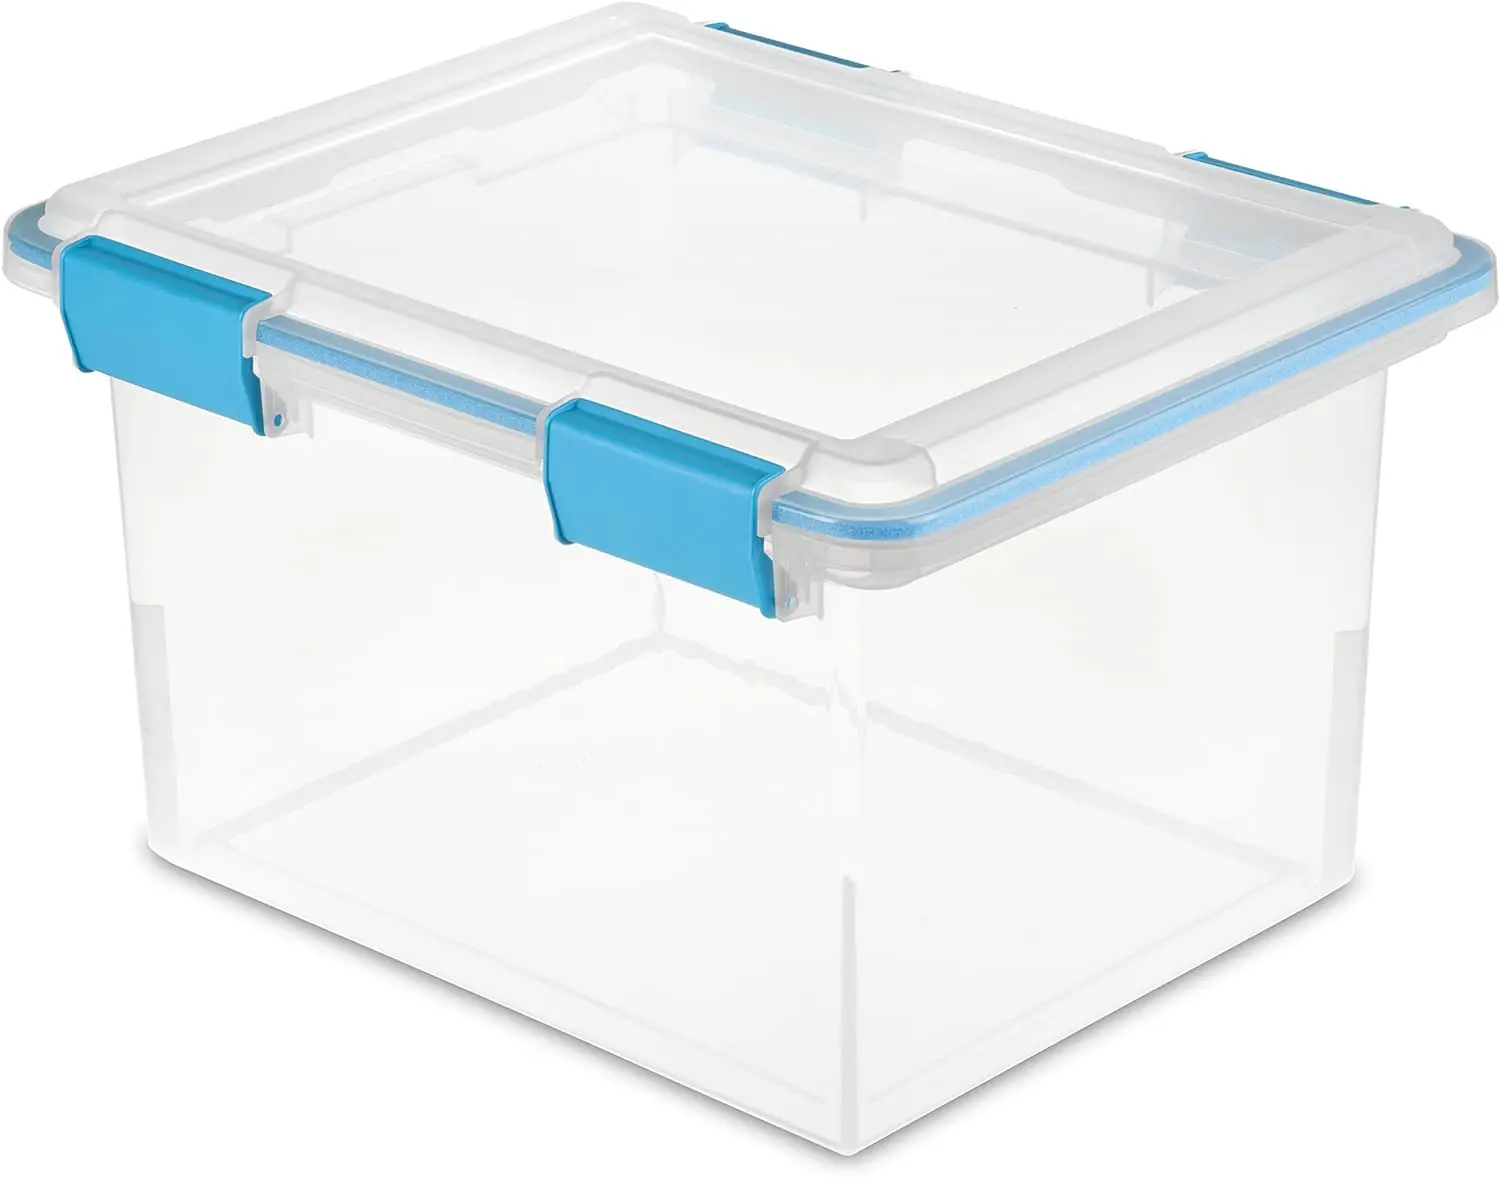 

Sterilite 32 Qt Gasket Box, Stackable Storage Bin with Latching Lid and Tight Seal Plastic Container to Organize Basement, Clear